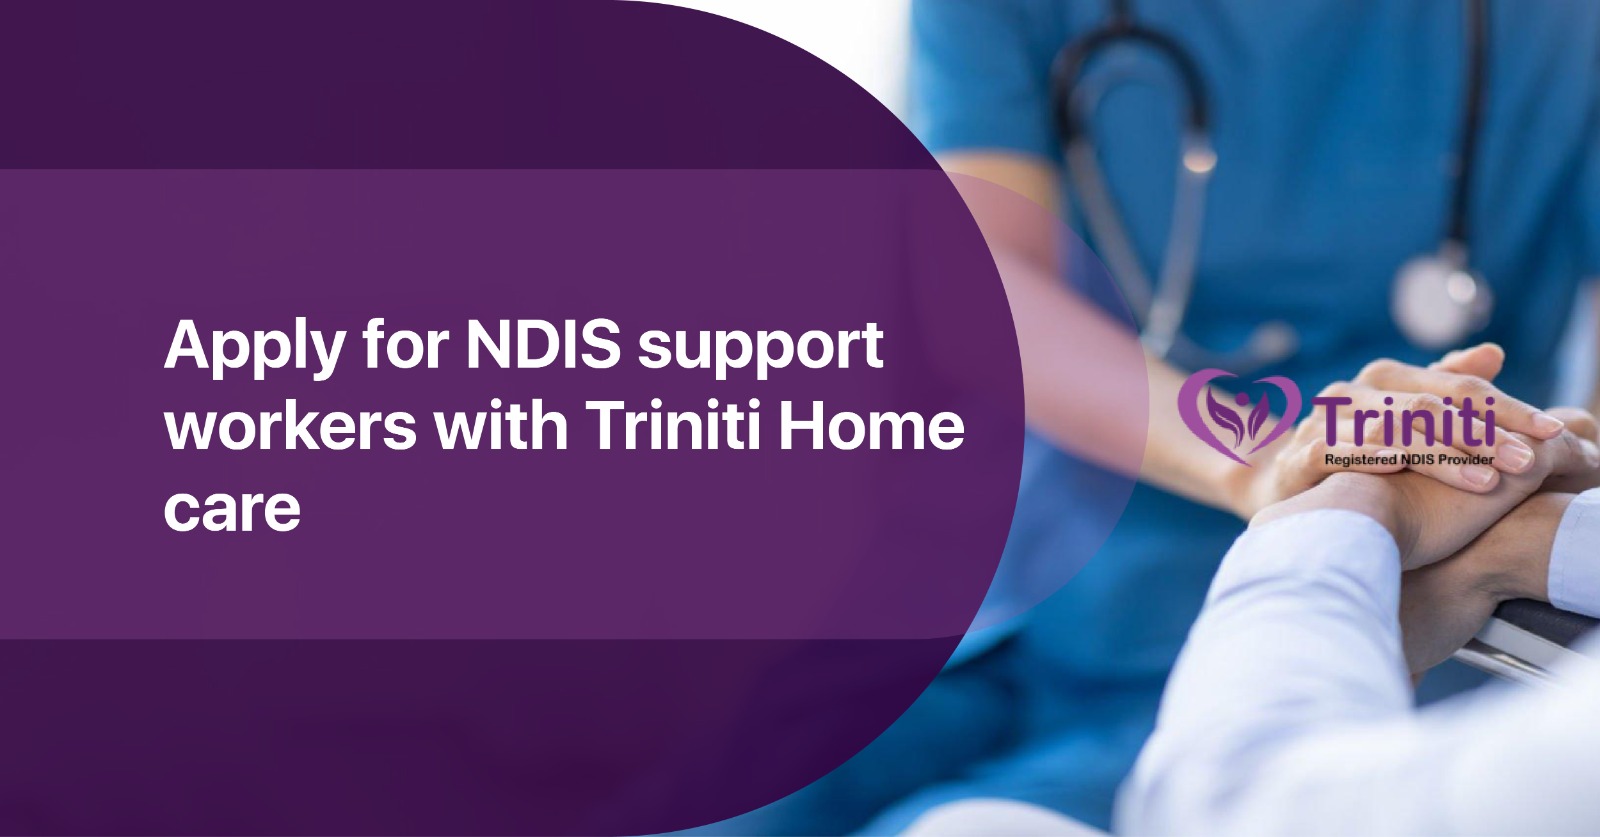 Apply for NDIS support workers with Triniti Home care